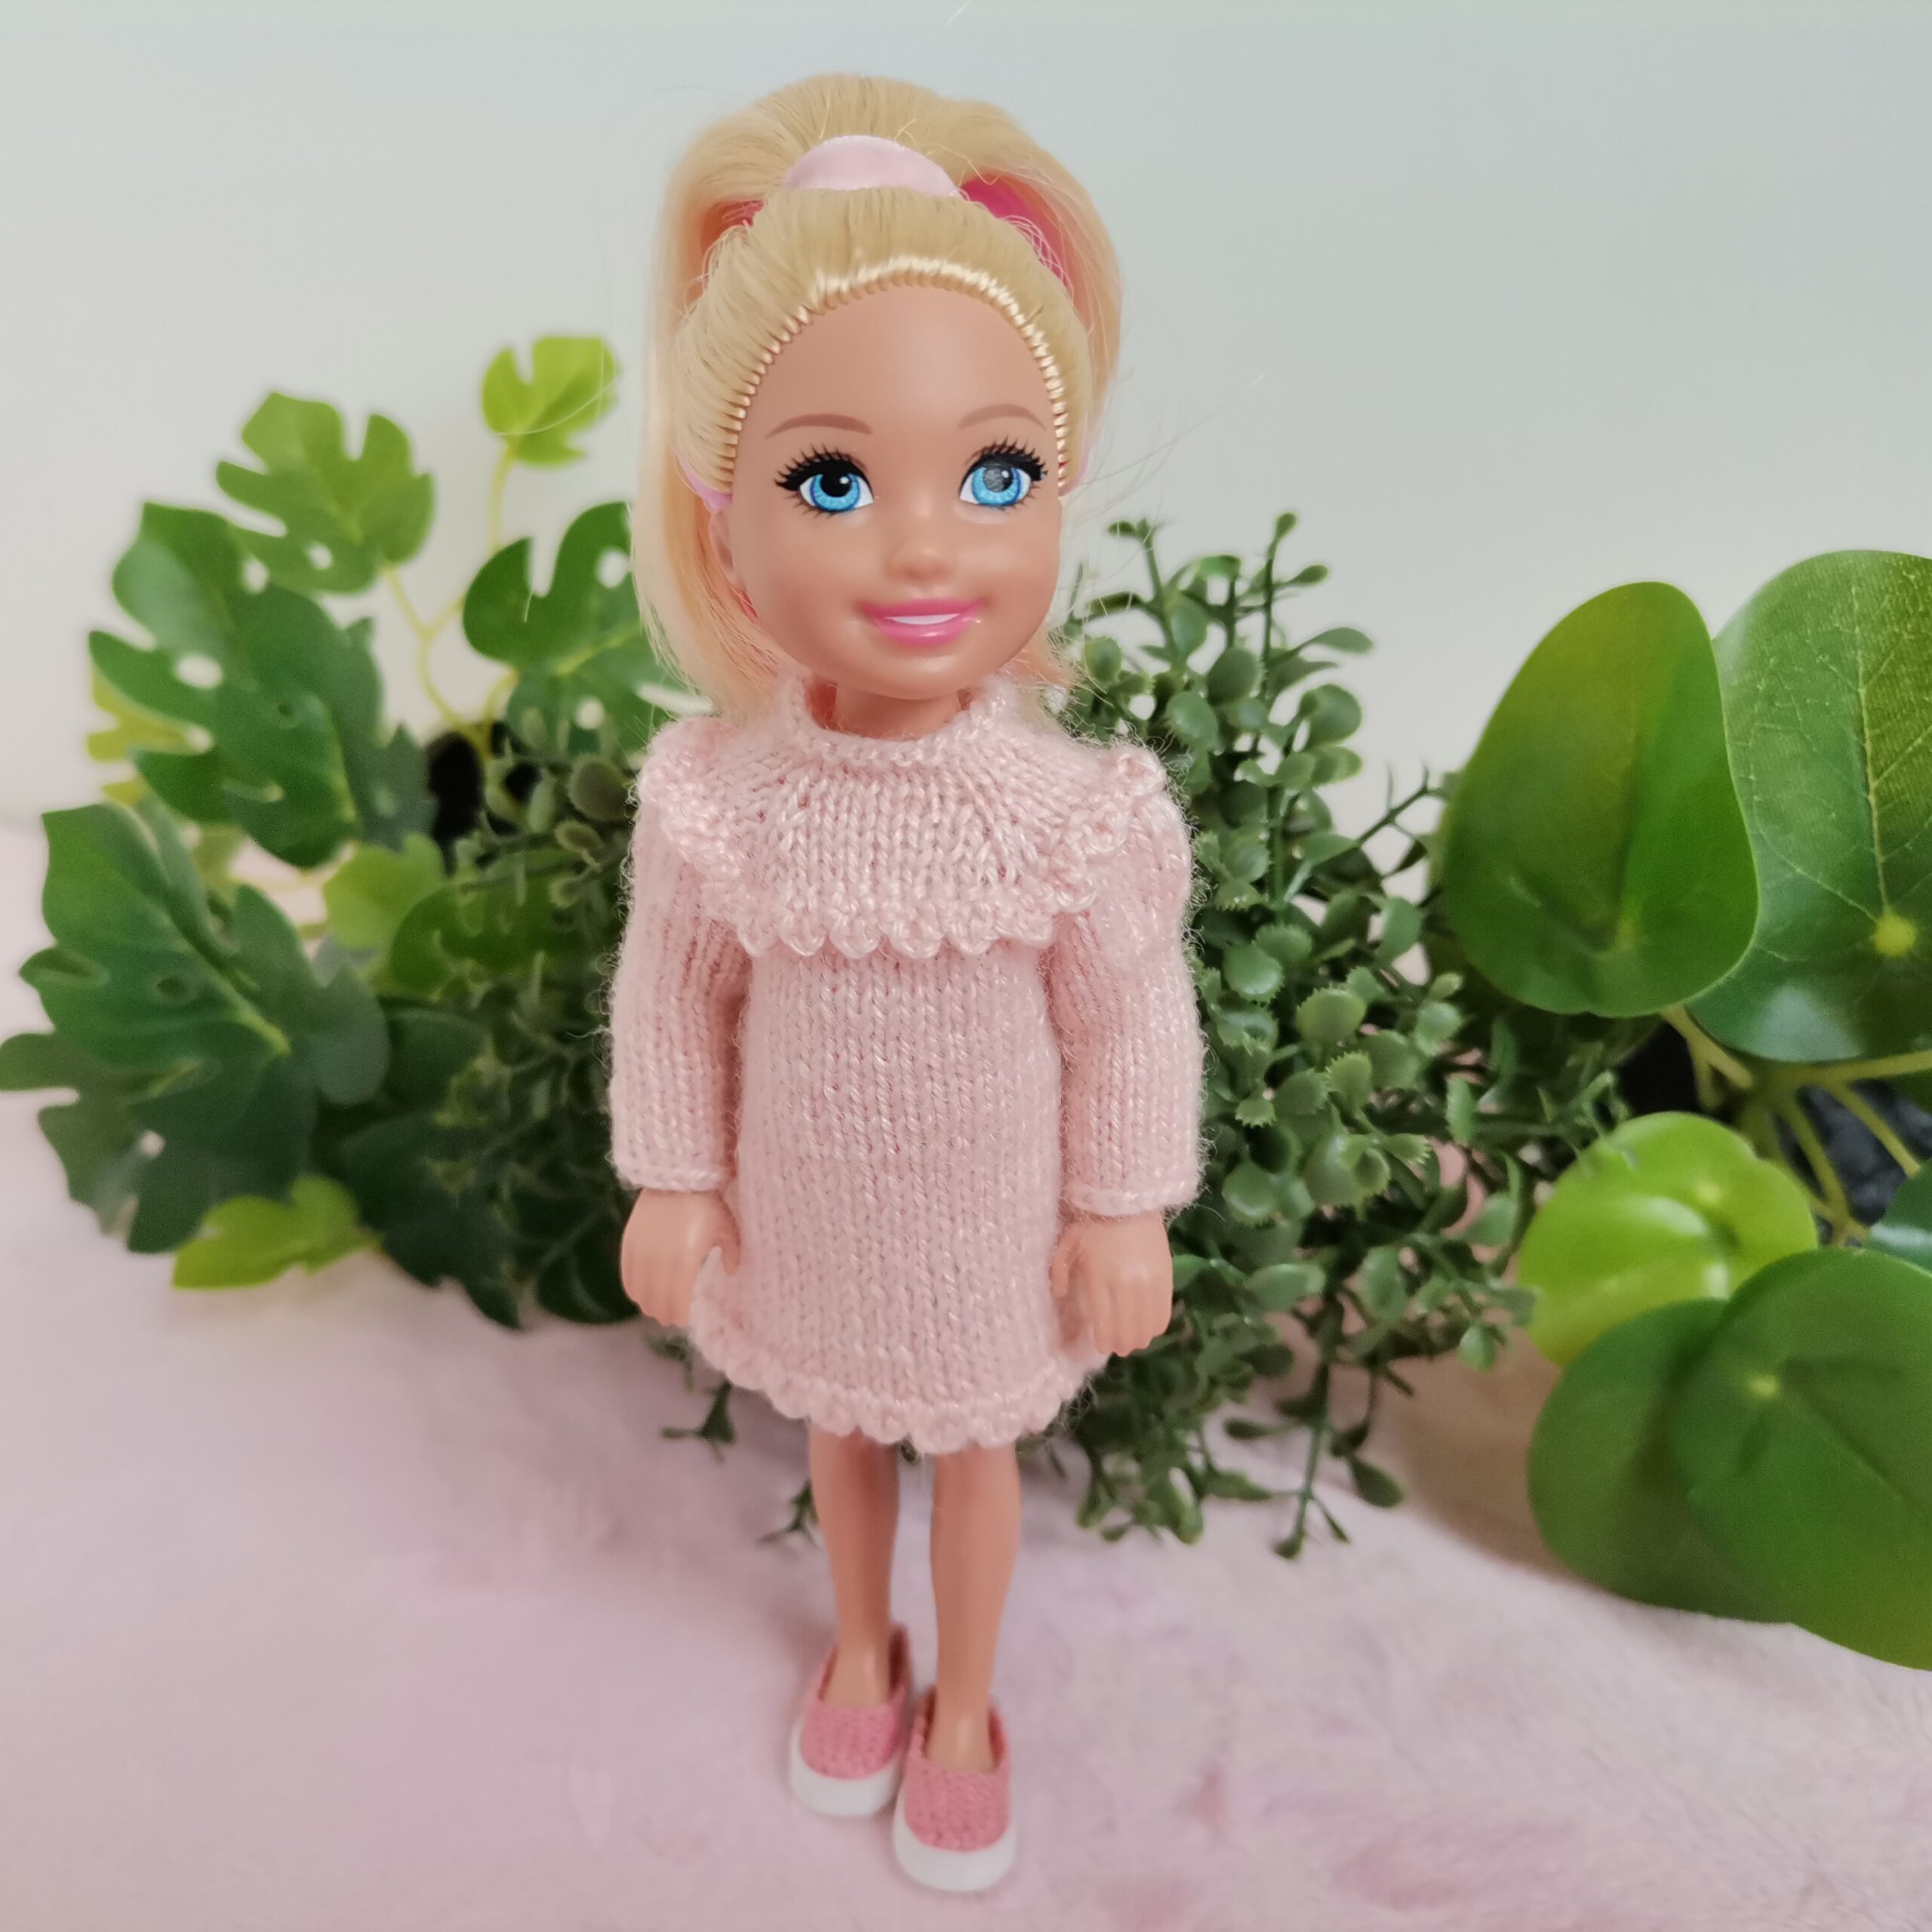 Knitted wool dress and shoes for Chelsea Barbie Doll